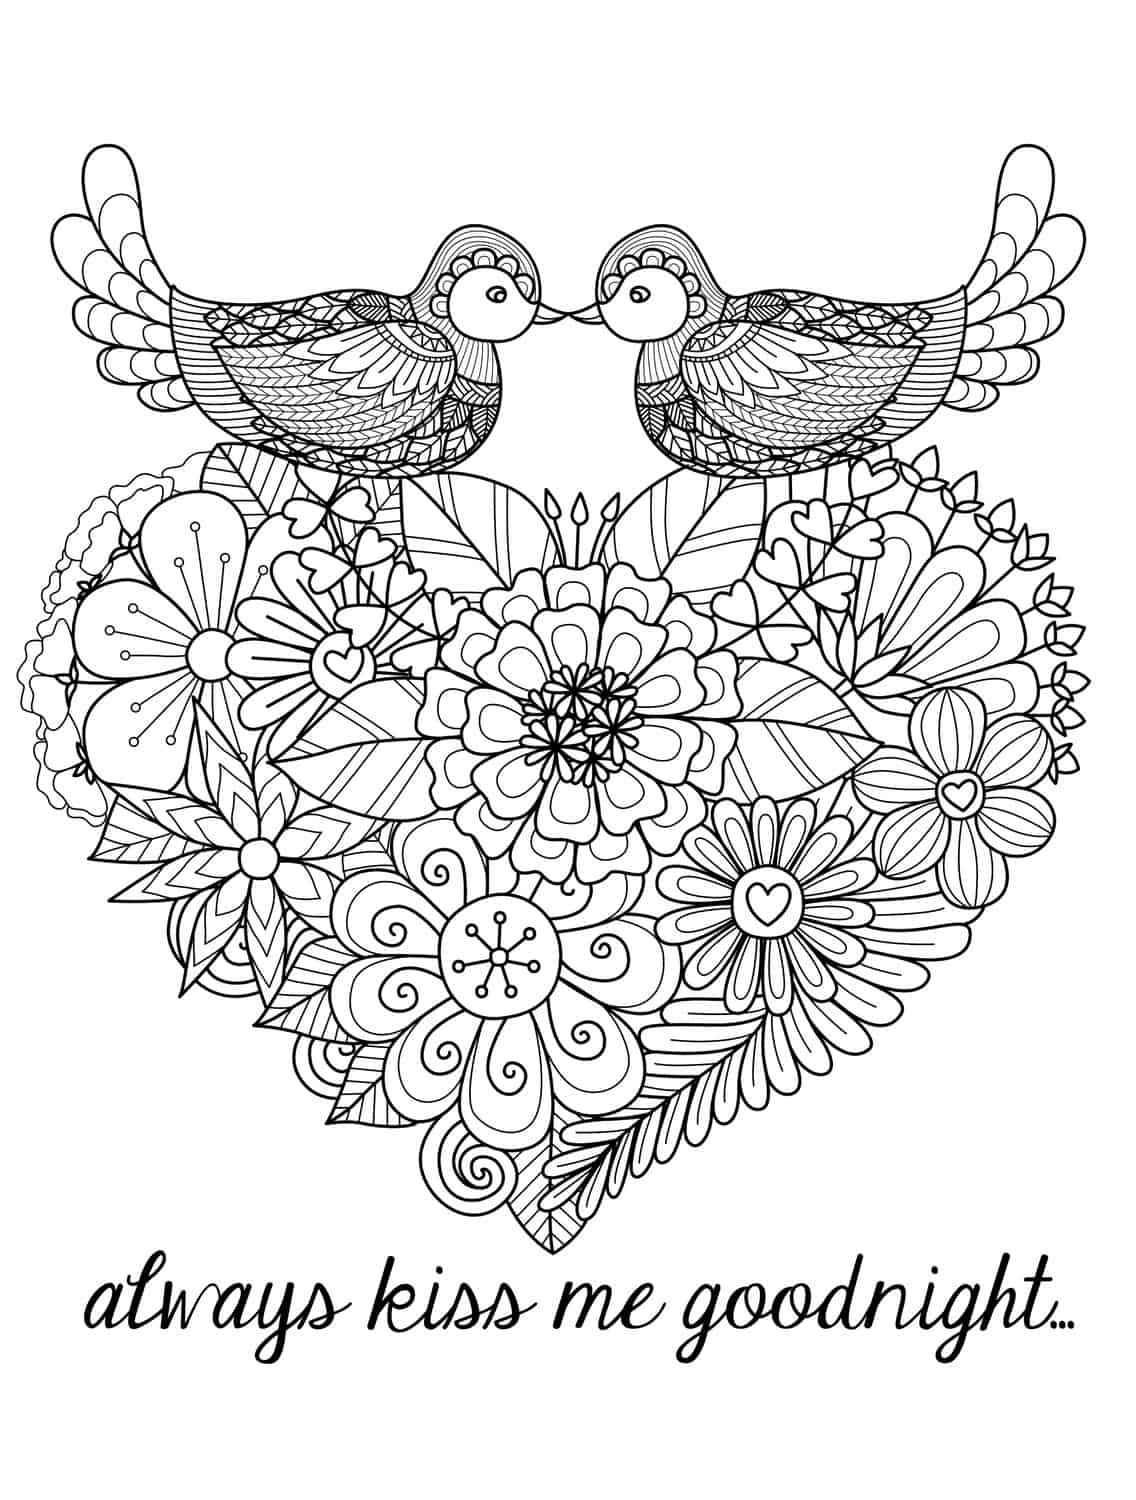 Adult Coloring Pages Heart
 Adult Coloring Pages on Pinterest